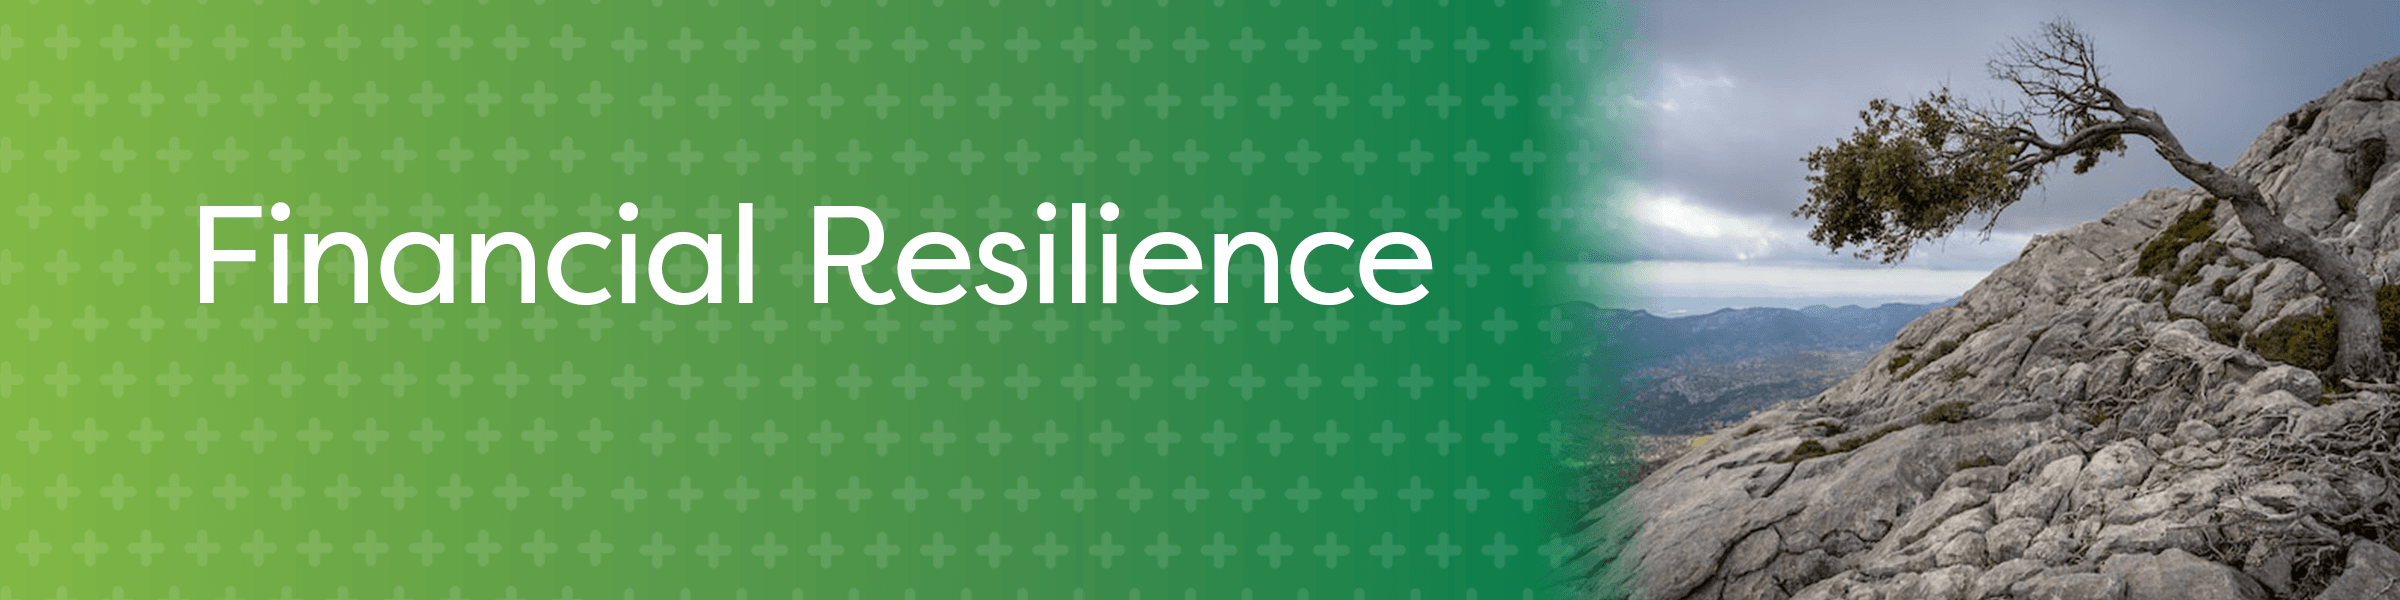 Financial resilience